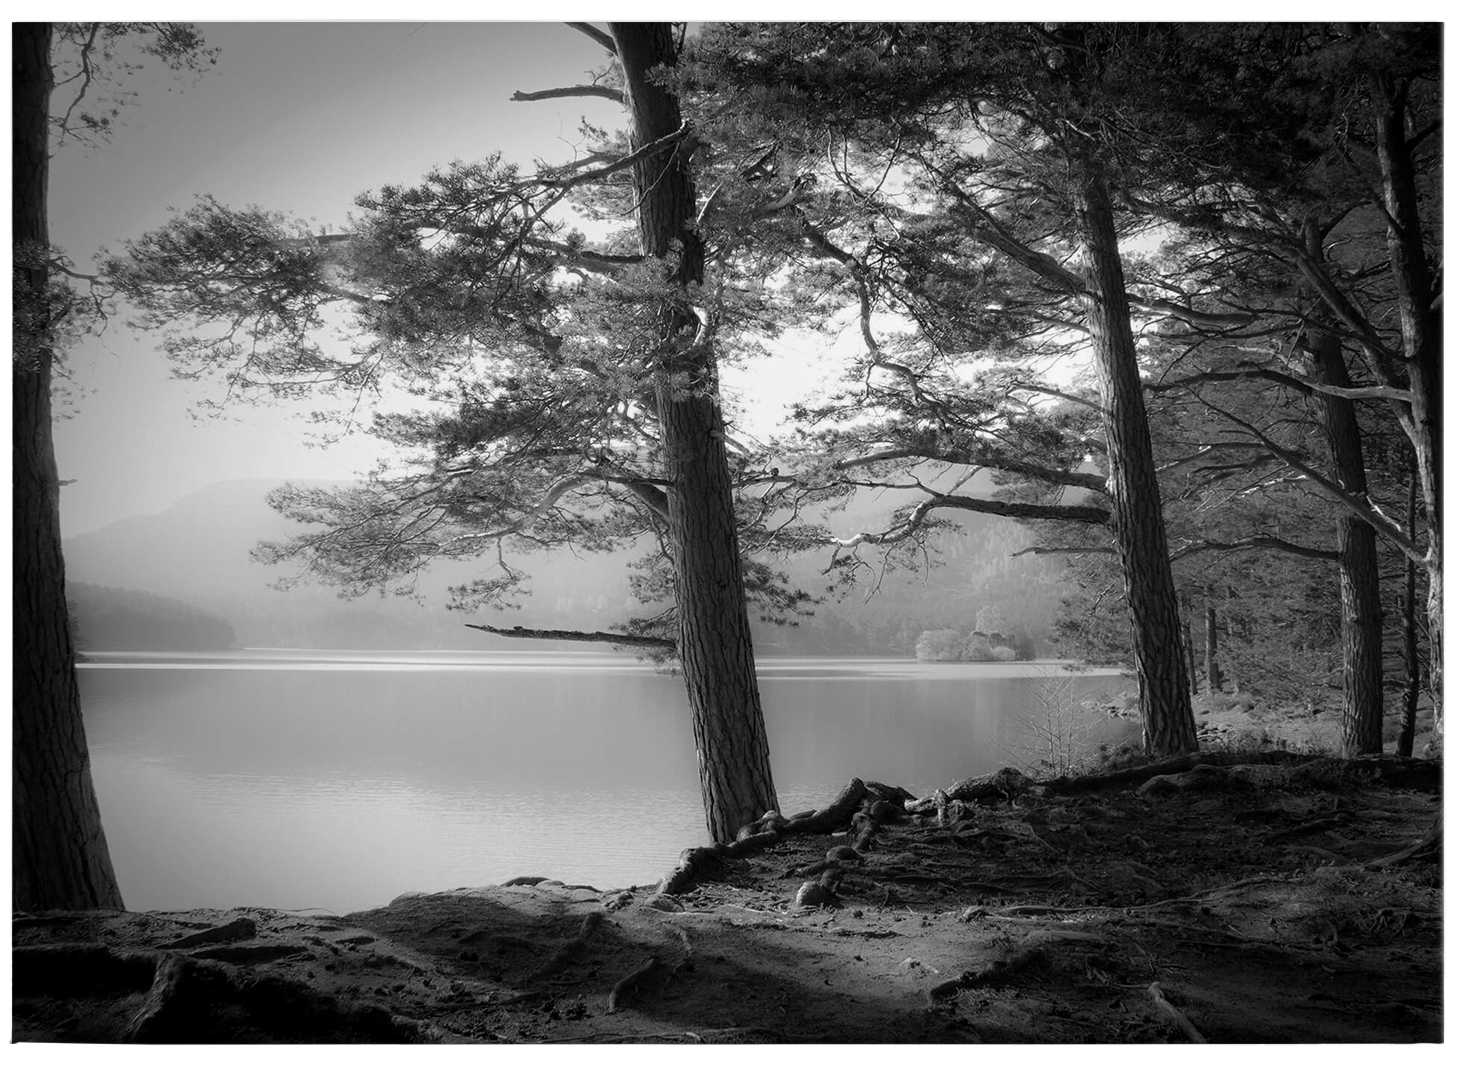             Black and white canvas print forest and lake by Fuhg
        